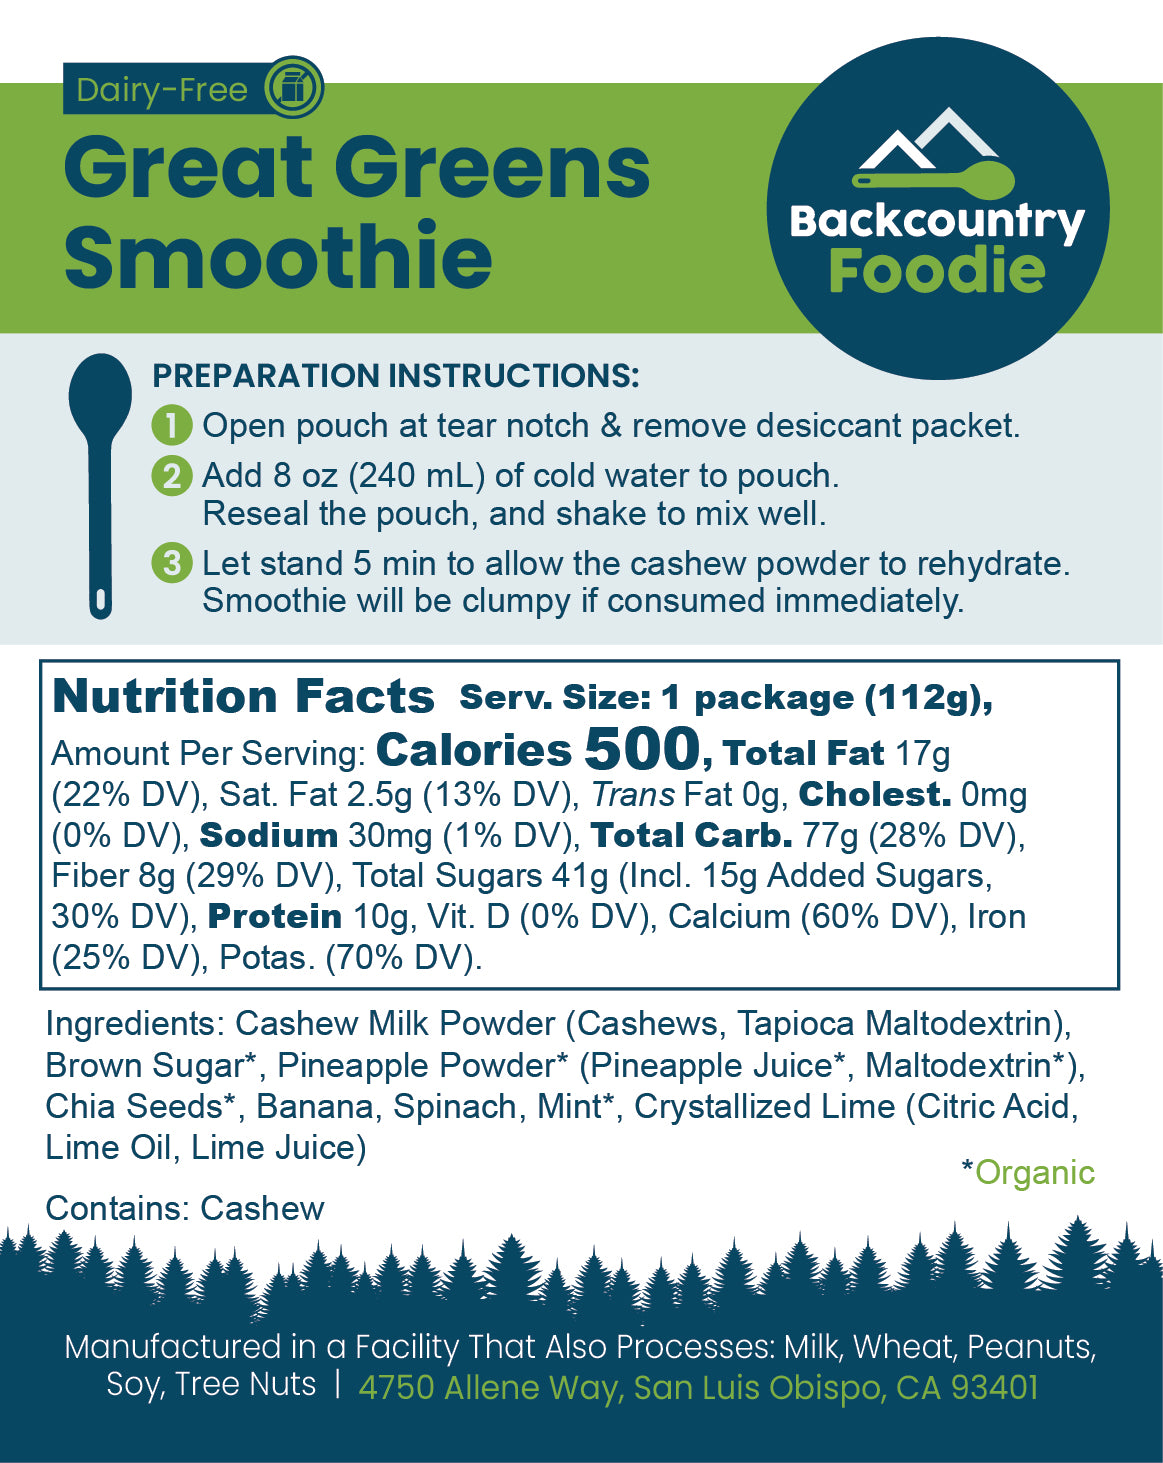 Backcountry Foodie - Great Greens Smoothie, Dairy-Free